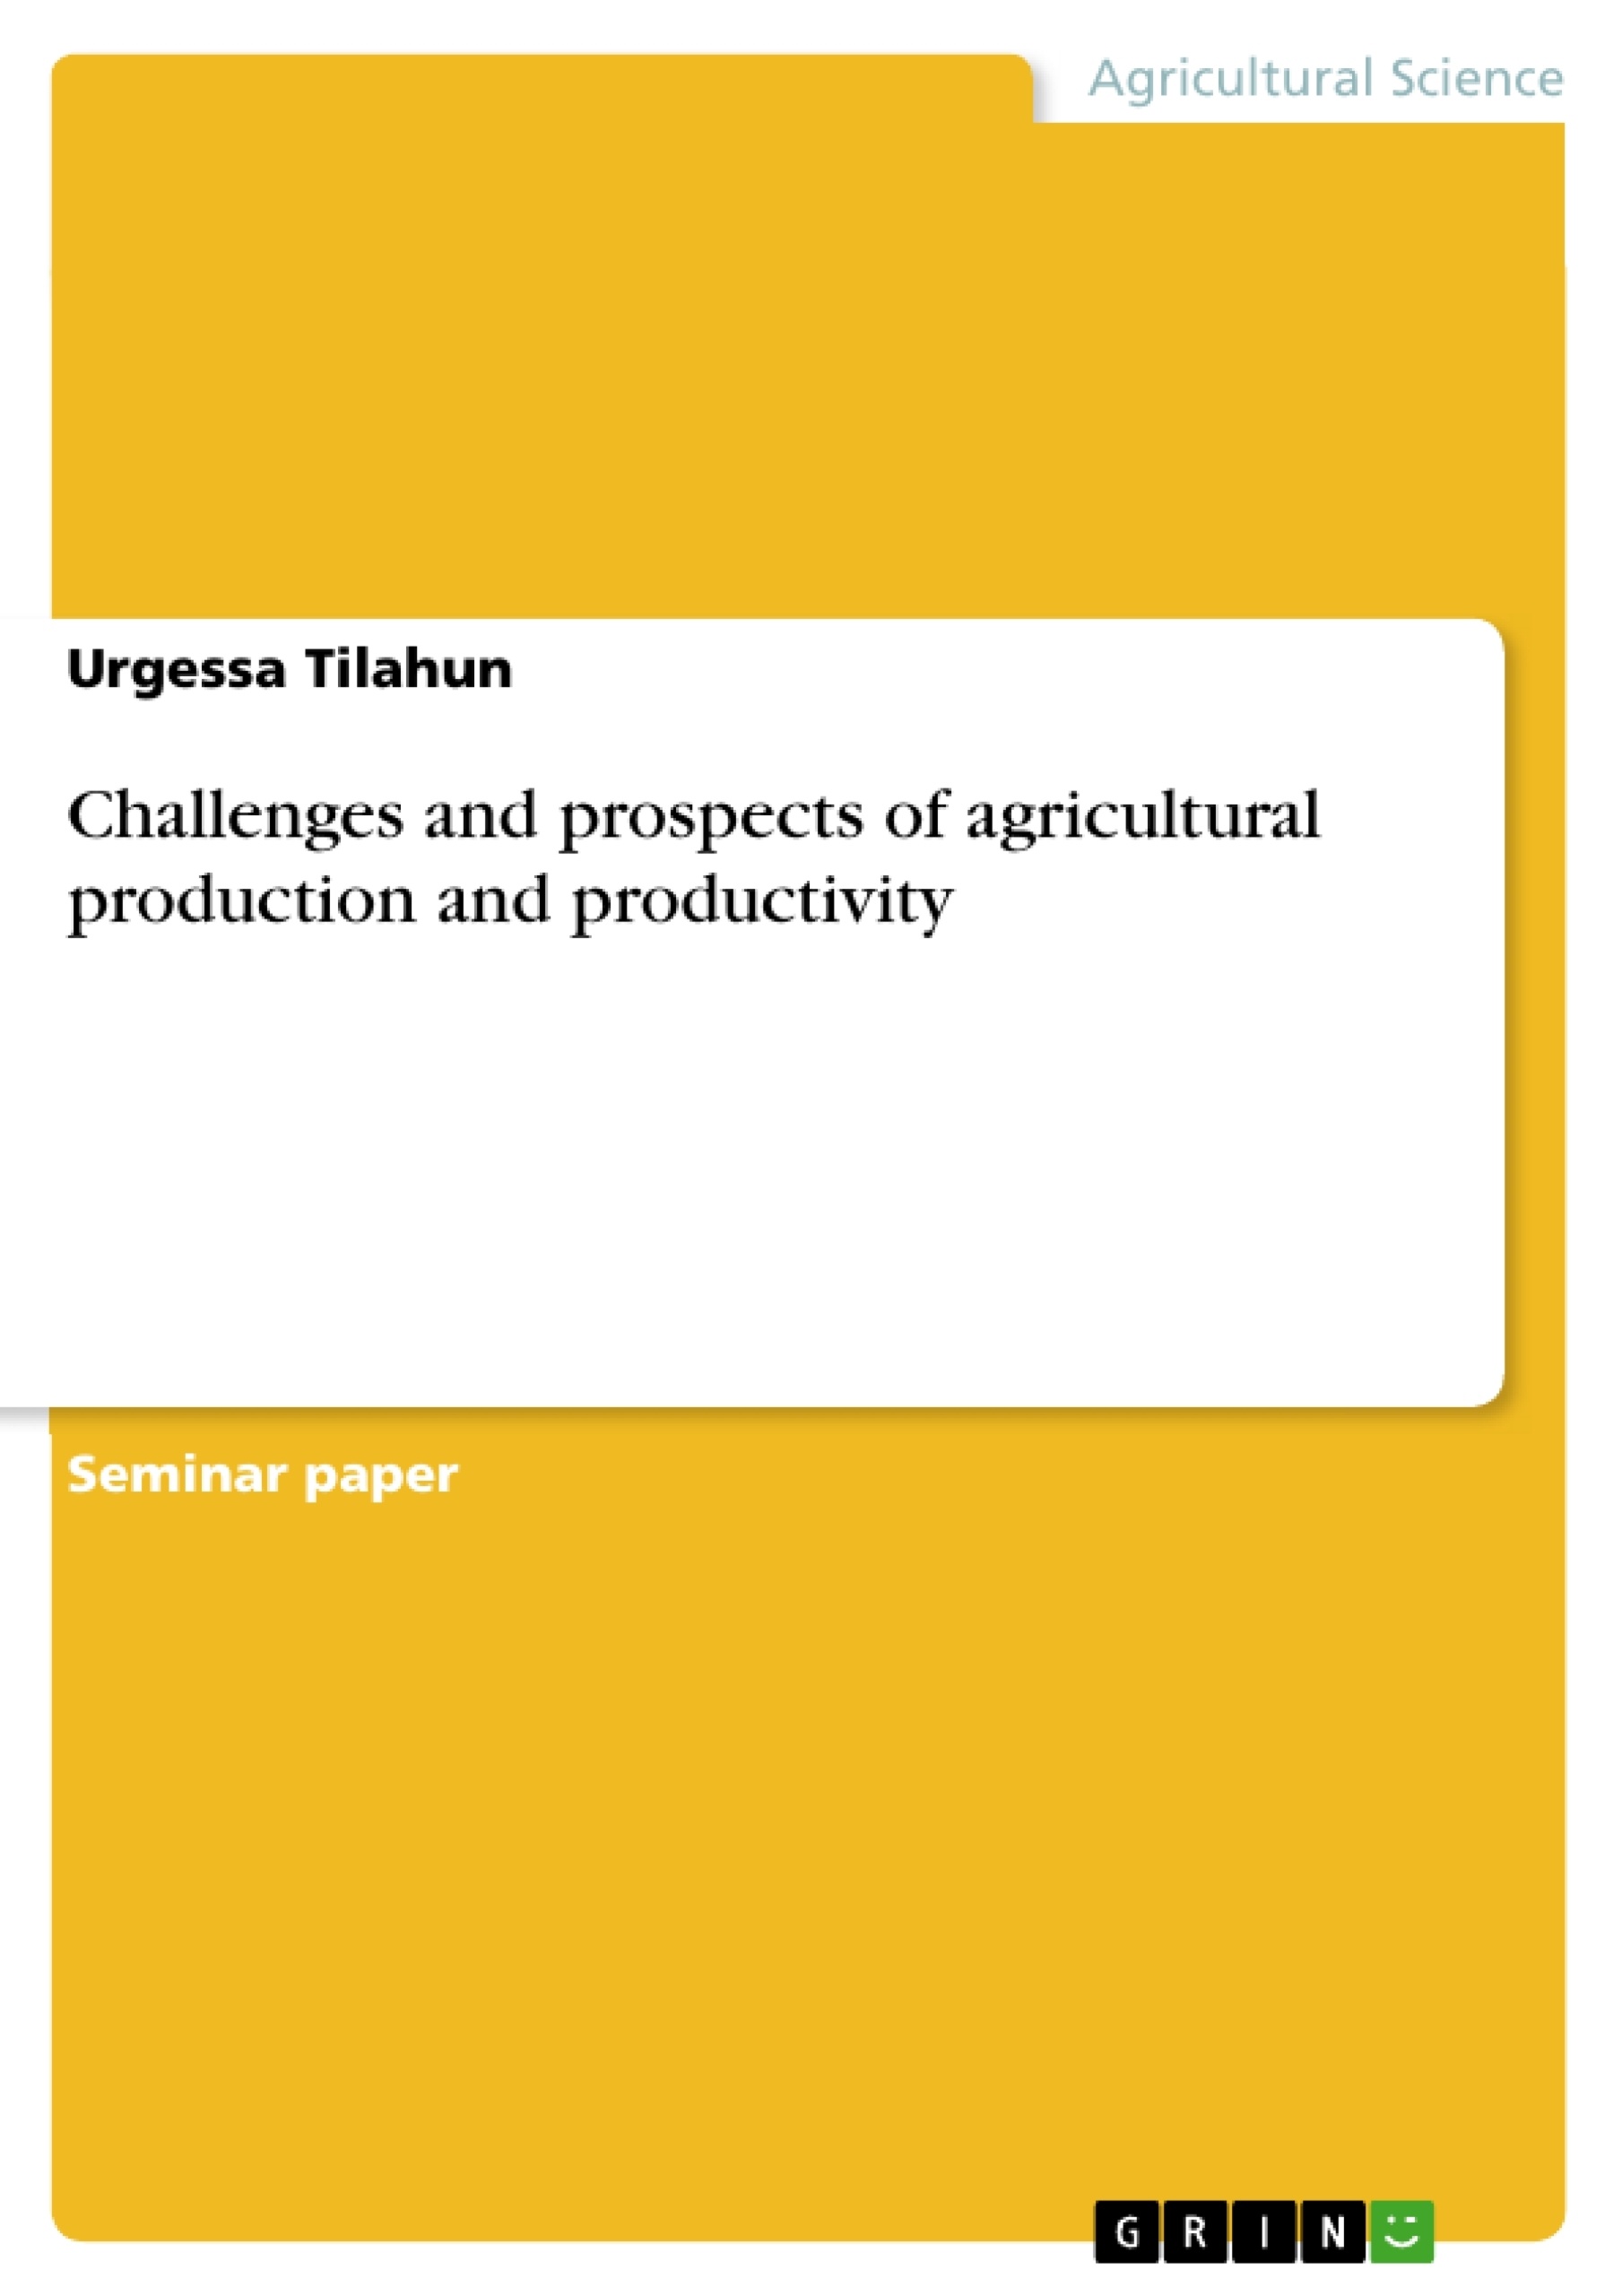 Titel: Challenges and prospects of agricultural production and productivity